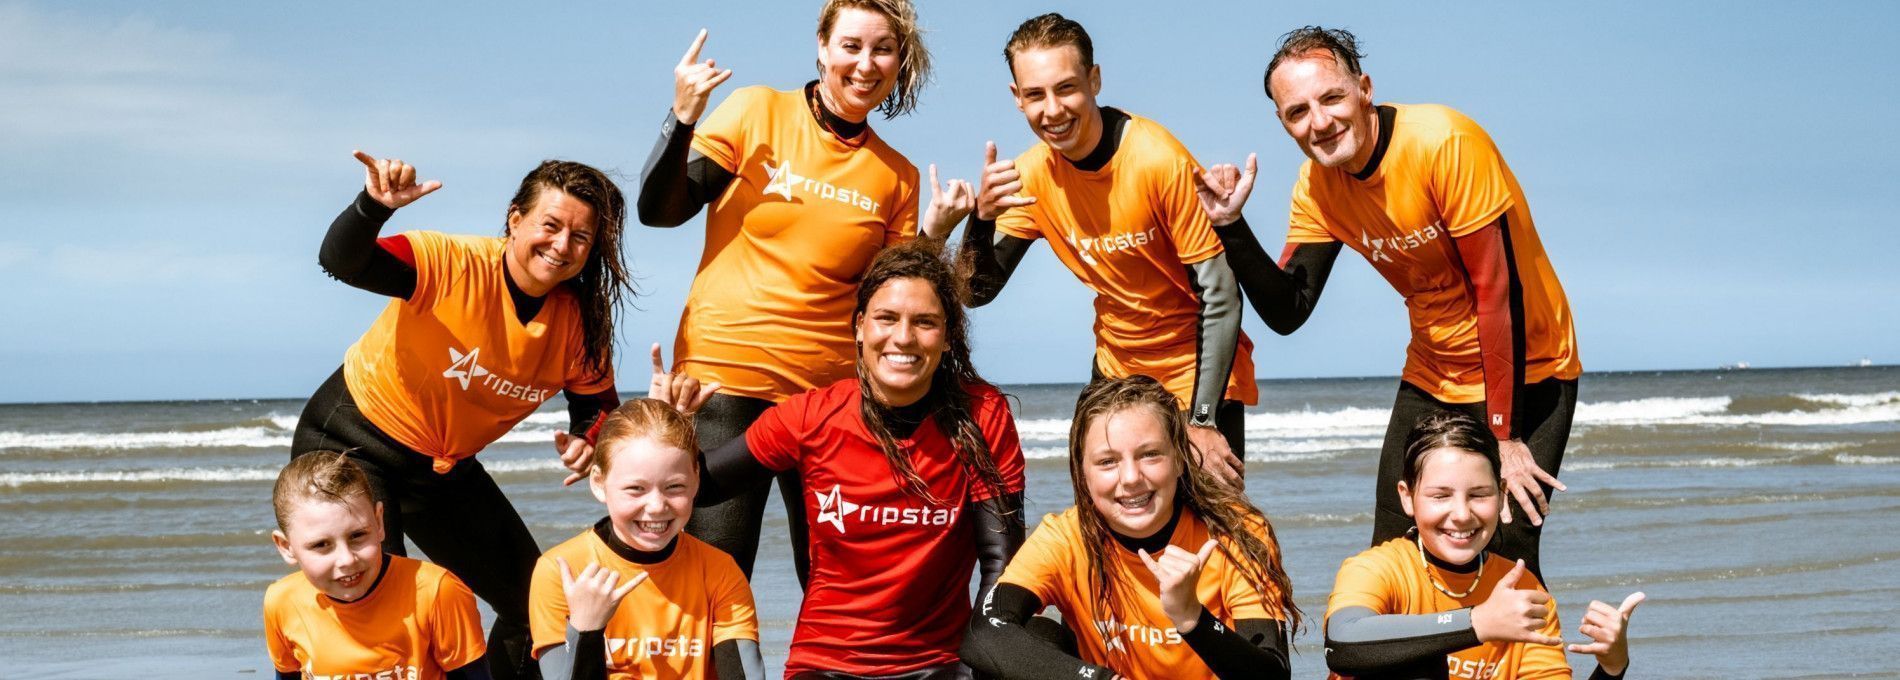 Ripstar surfing vacations and surfing camps - Tourist Information 